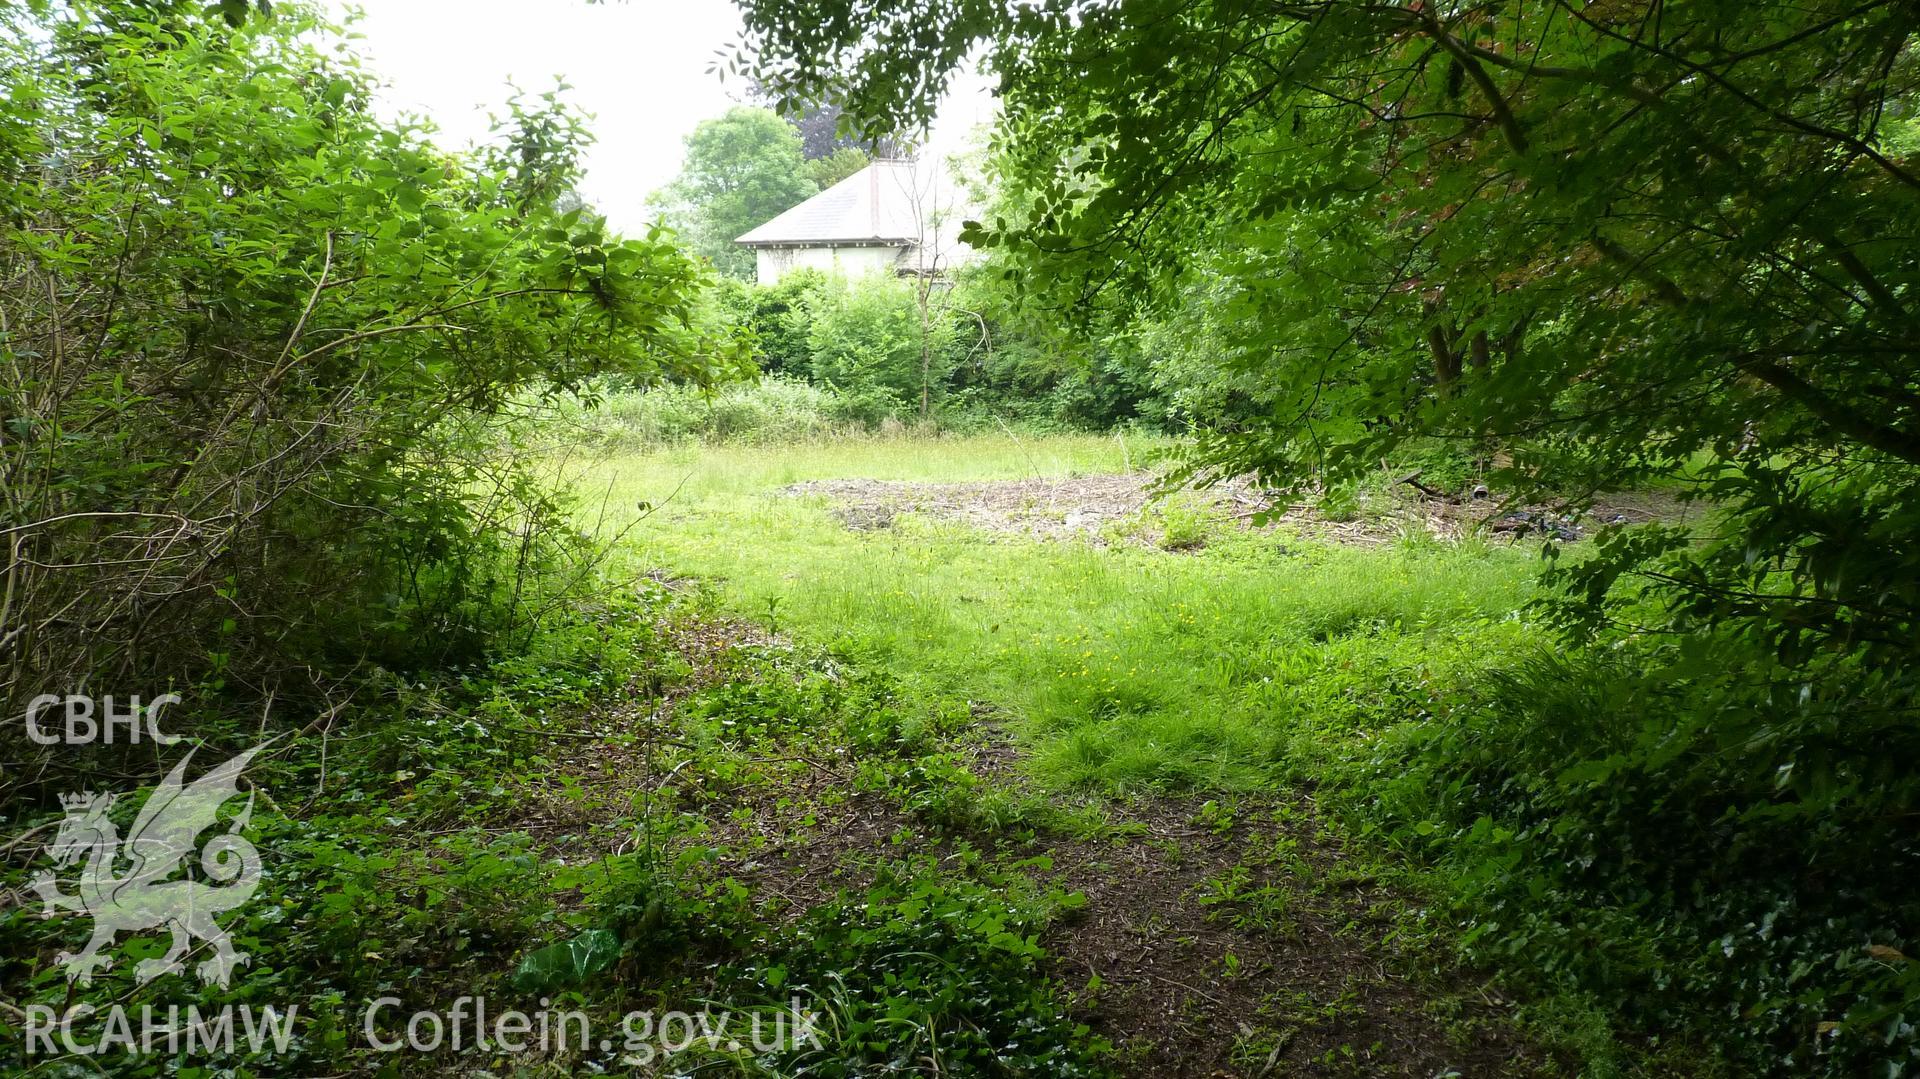 'View southeast into the central area of the walled kitchen garden, illustrating the overgrown nature of the site.' Photographed as part of archaeological work at Coed Parc, Newcastle, Bridgend, carried out by Archaeology Wales, 2016. Project no. P2432.